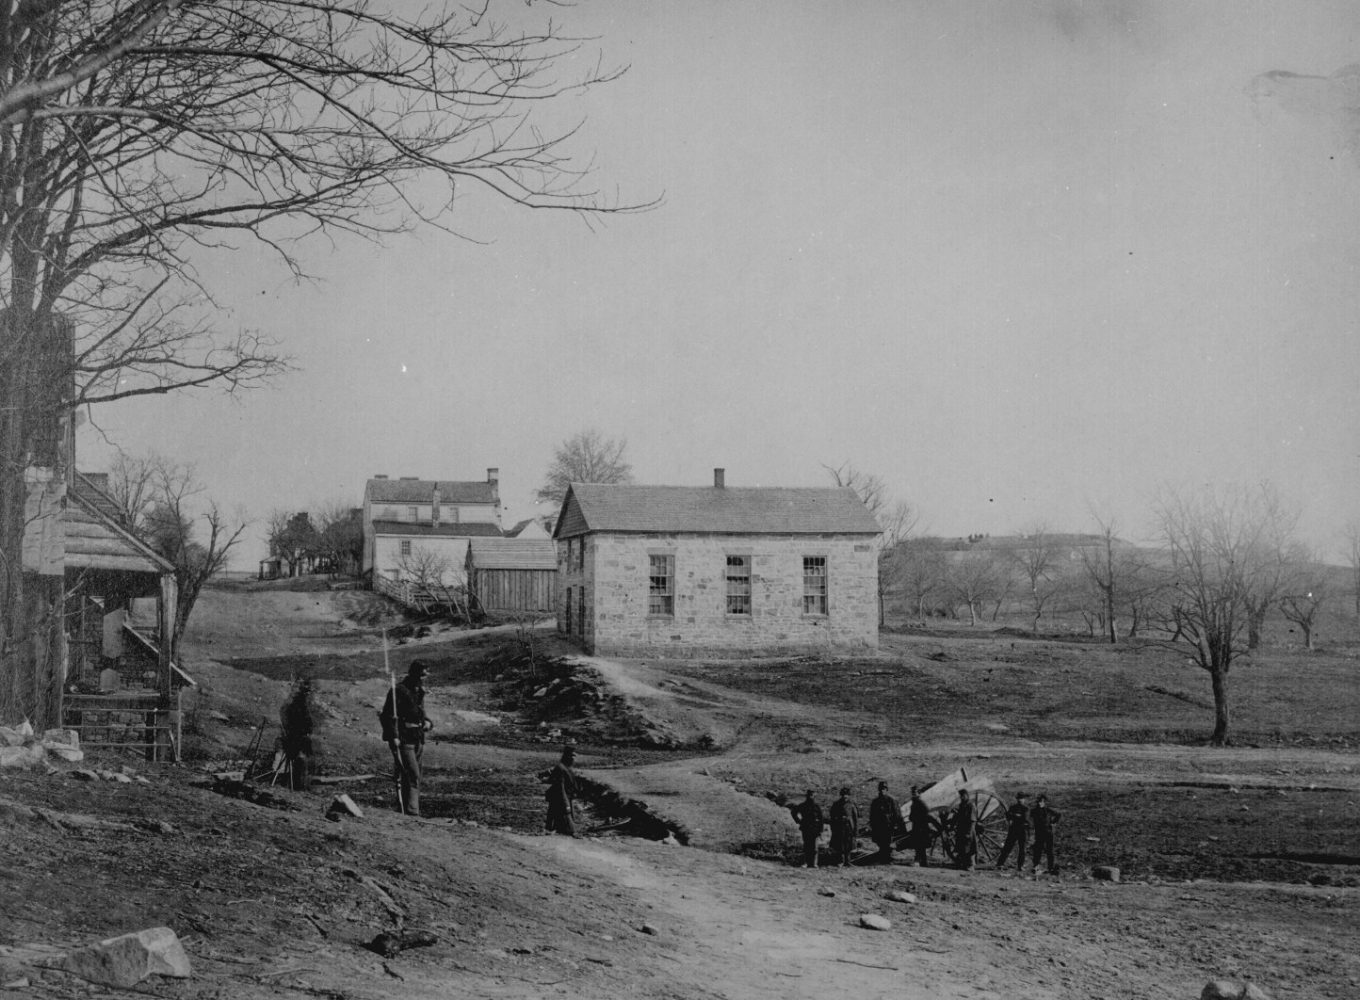 This view of Centreville during the Civil War includes Braddock road and what is now the Centreville Historic district.